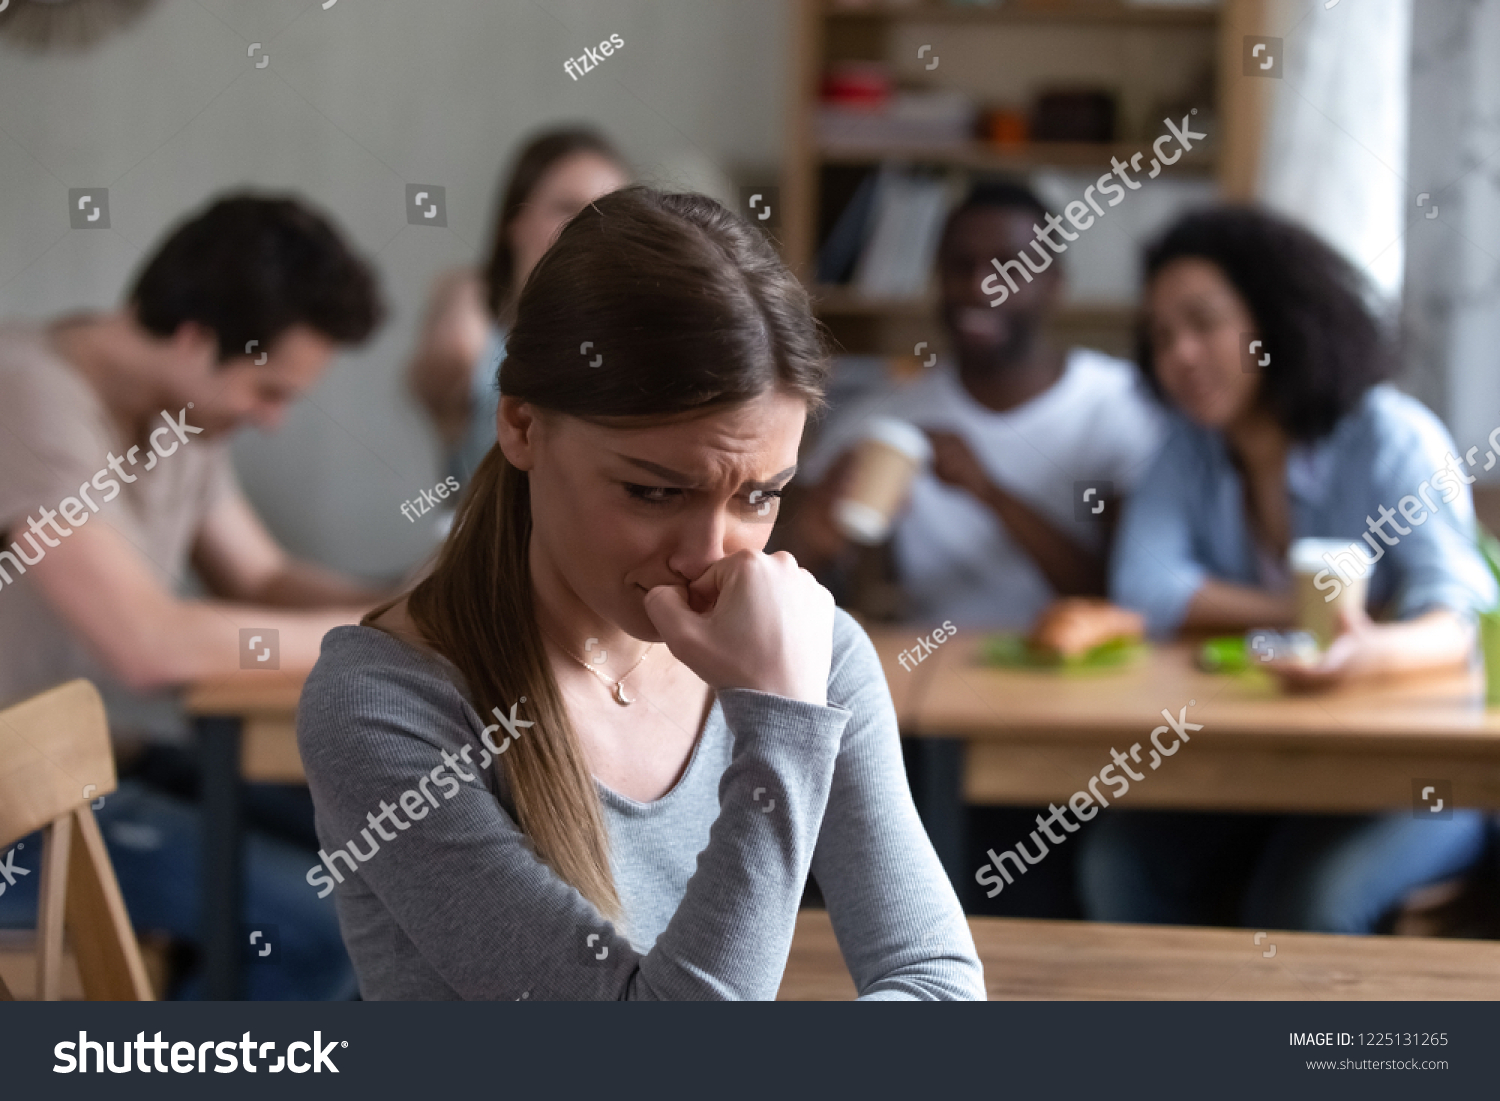 Diverse multi-ethnic friends sitting together in cafe talking having fun, focus on frustrated shy girl sitting separately by others teenagers feels unhappy because peers not accept her she is outcast #1225131265